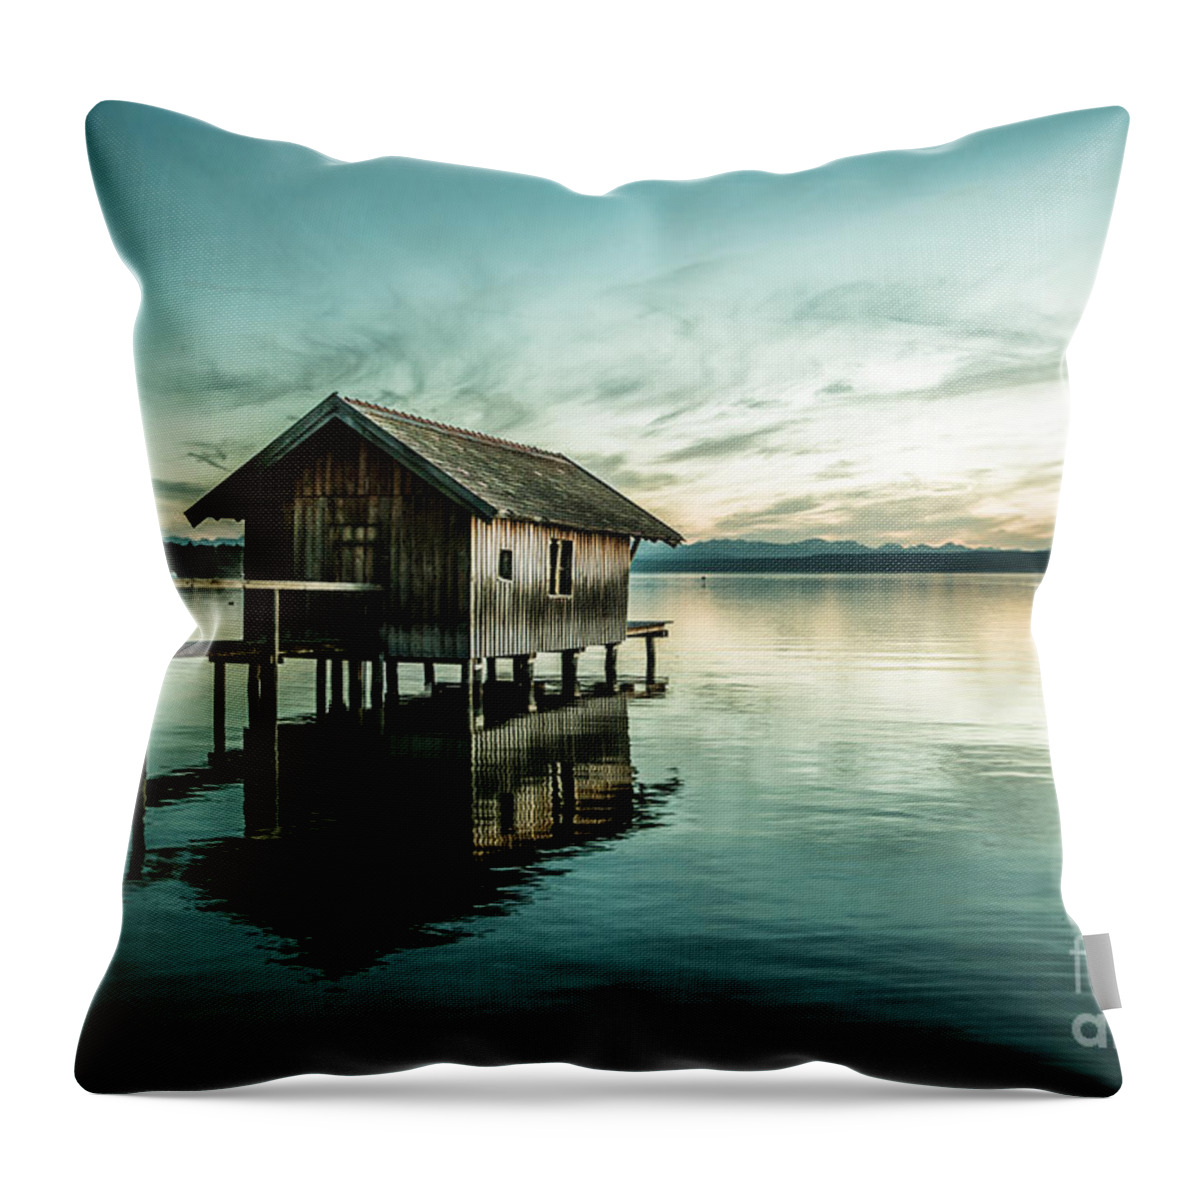 Ammersee Throw Pillow featuring the photograph The Waterhouse by Hannes Cmarits